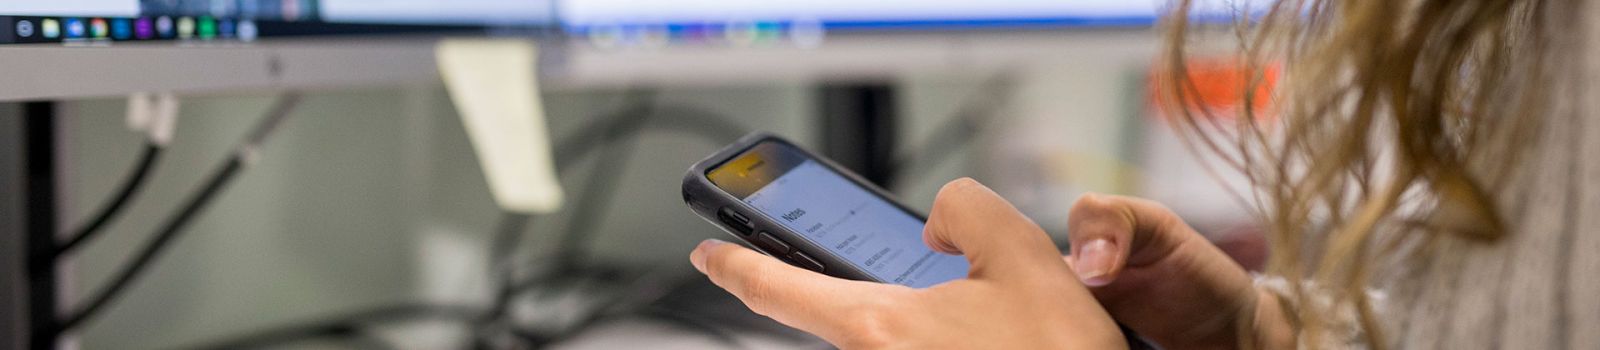 Image of fingers hovering over a phone with a computer in the background  banner image